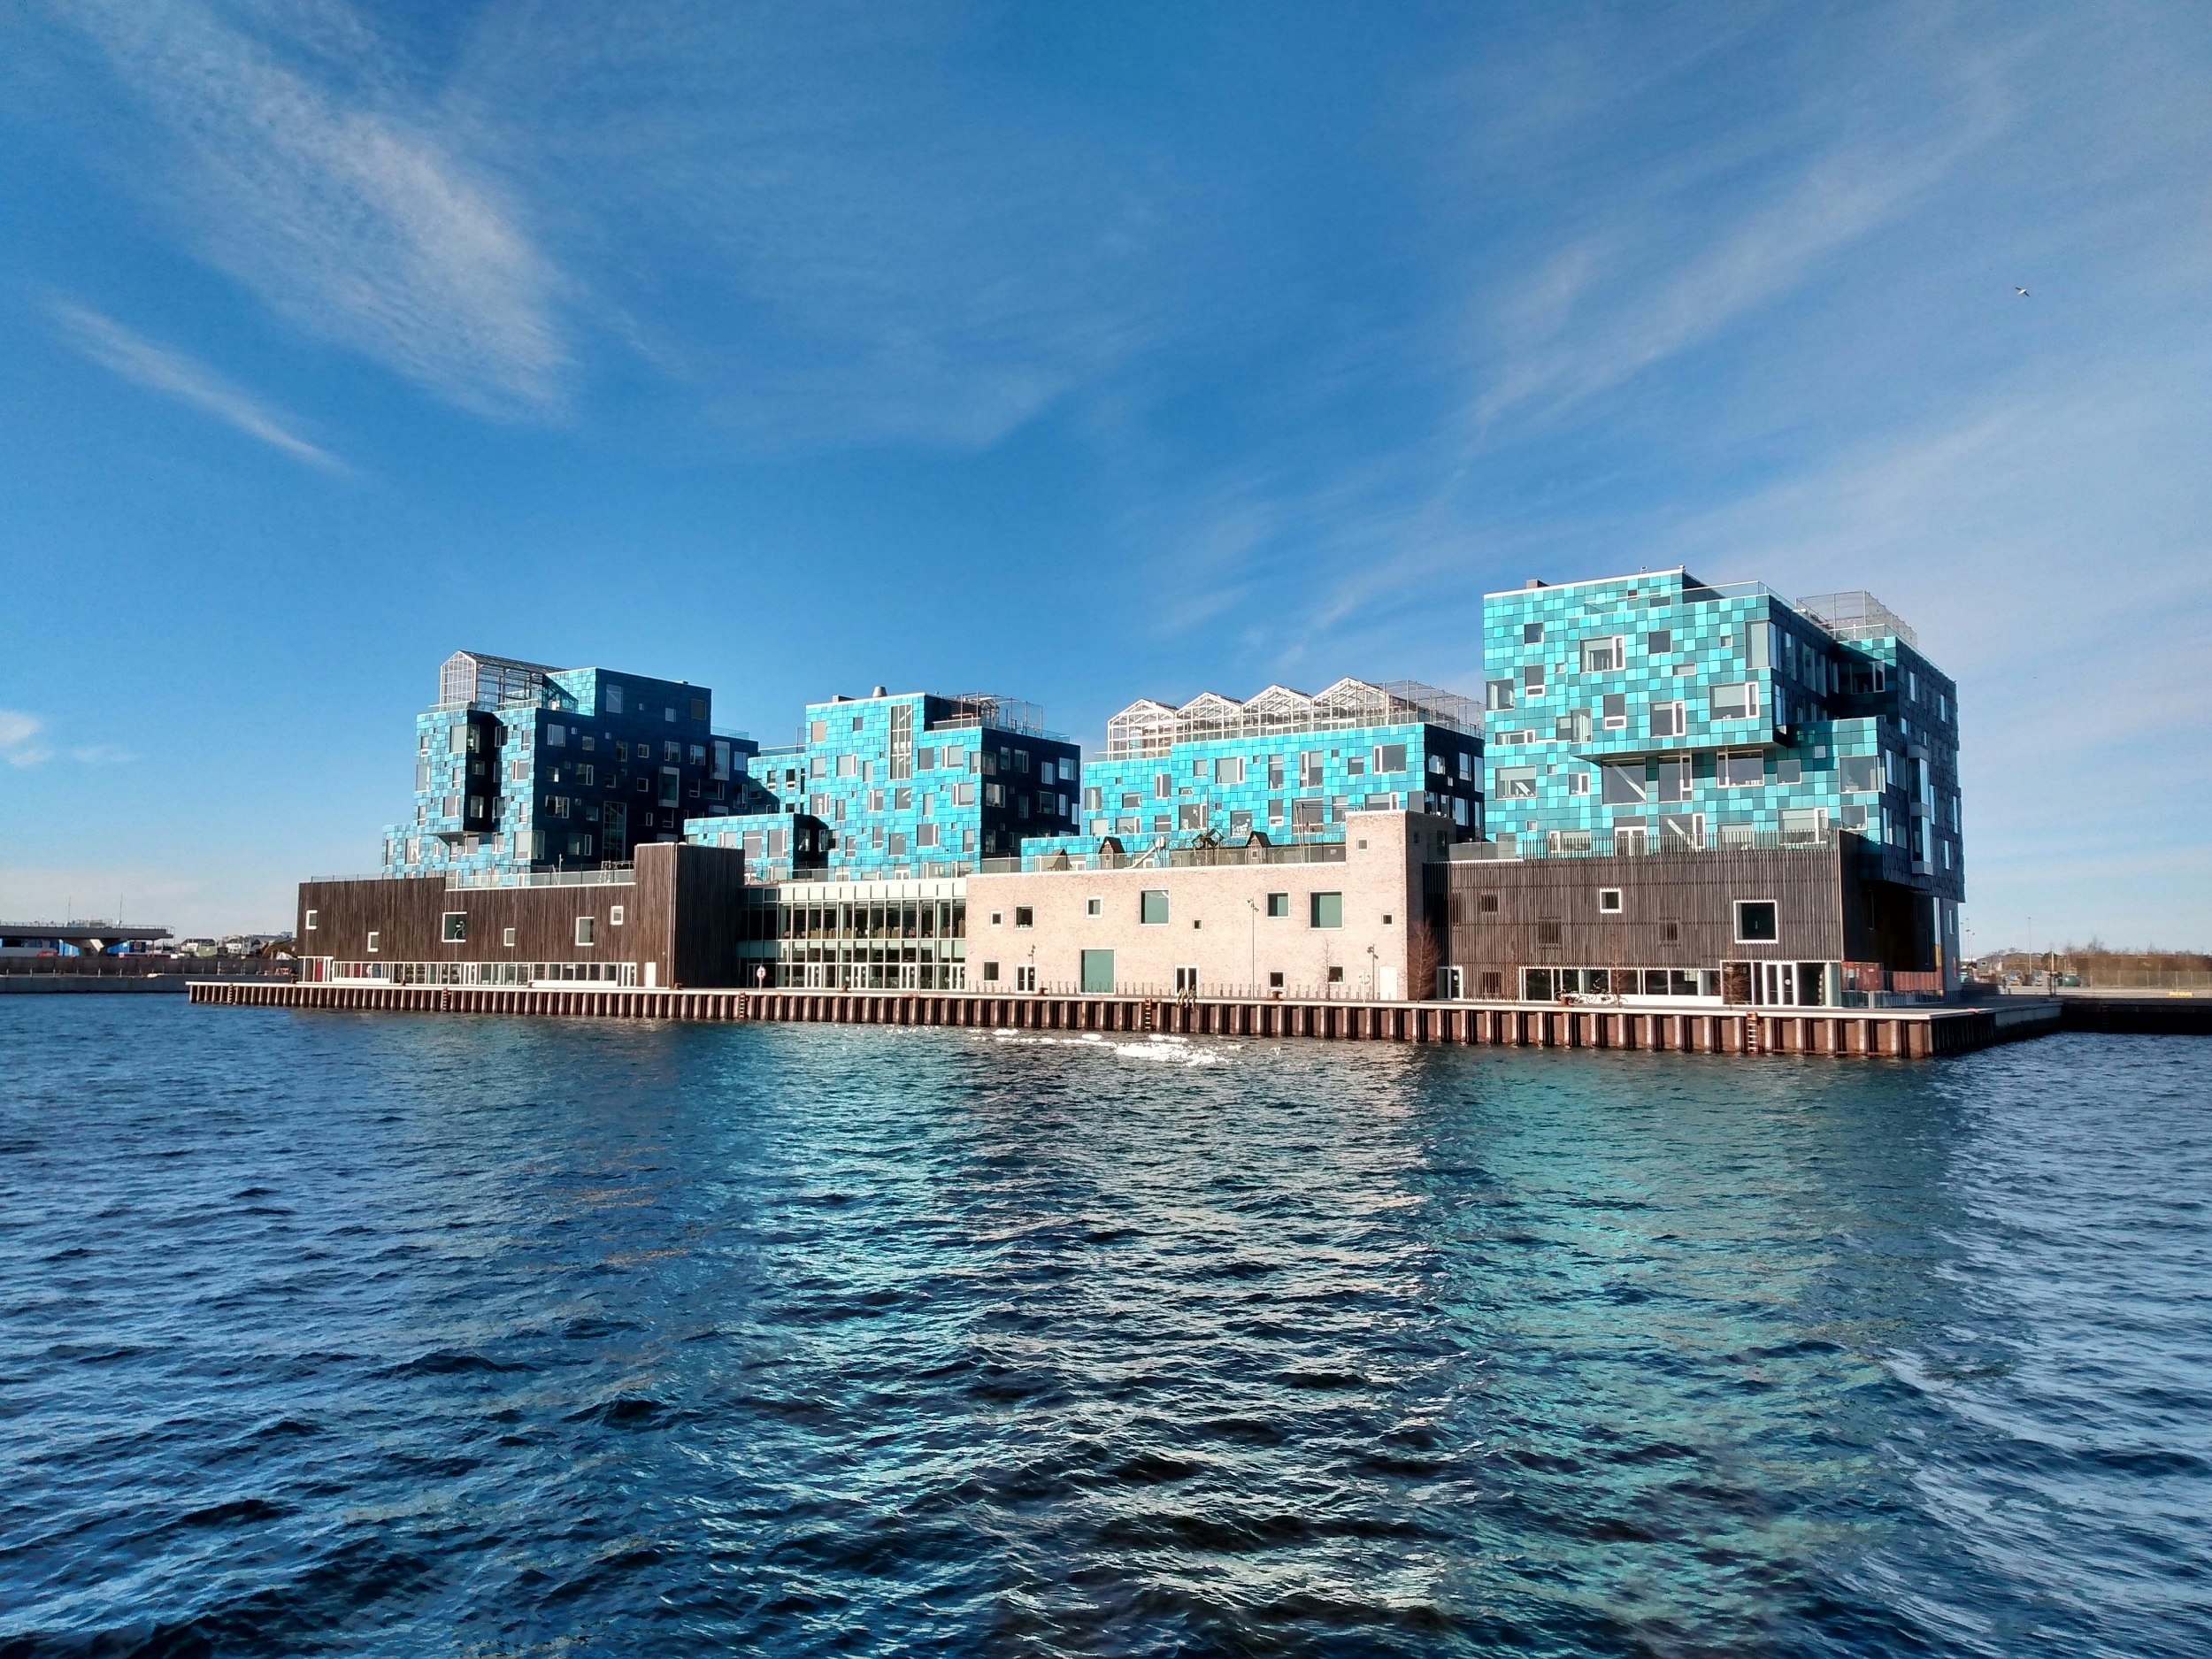 A large building on the edge of the water, covered in bright blue tiles that act as solar panels.